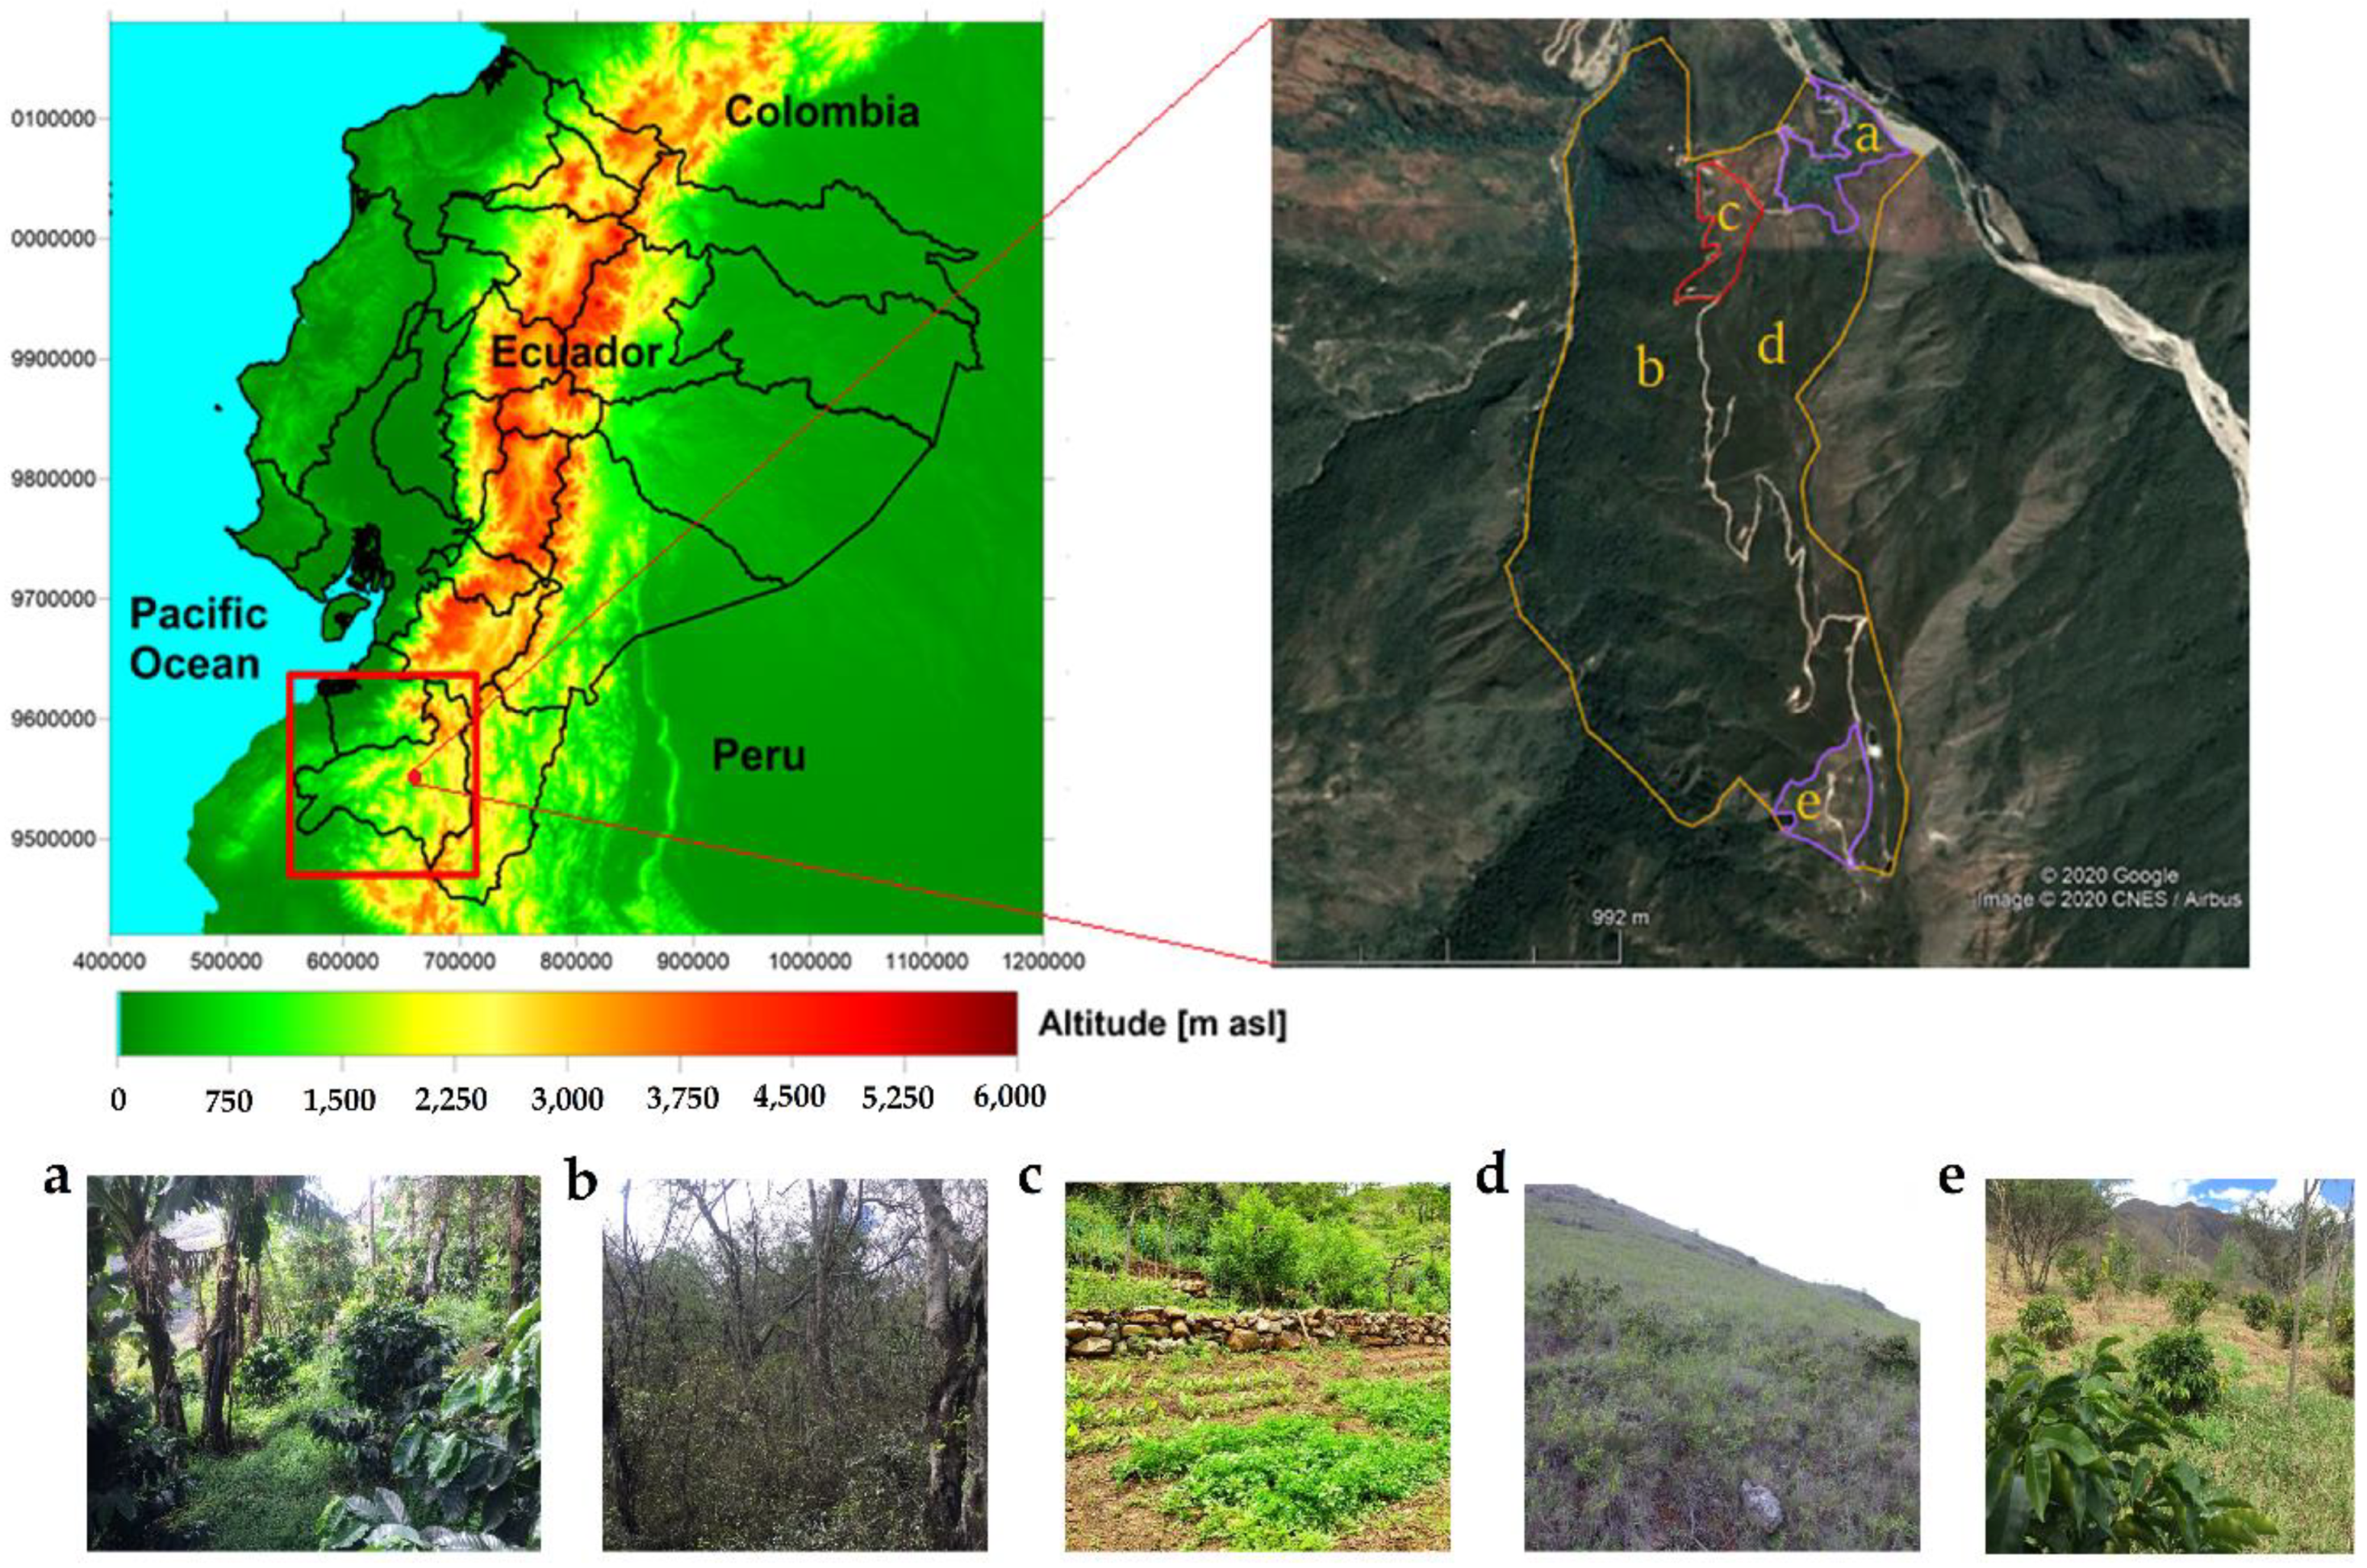 Insects | Free Full-Text | Effects of Land-Use Change on the Community  Structure of the Dung Beetle (Scarabaeinae) in an Altered Ecosystem in  Southern Ecuador